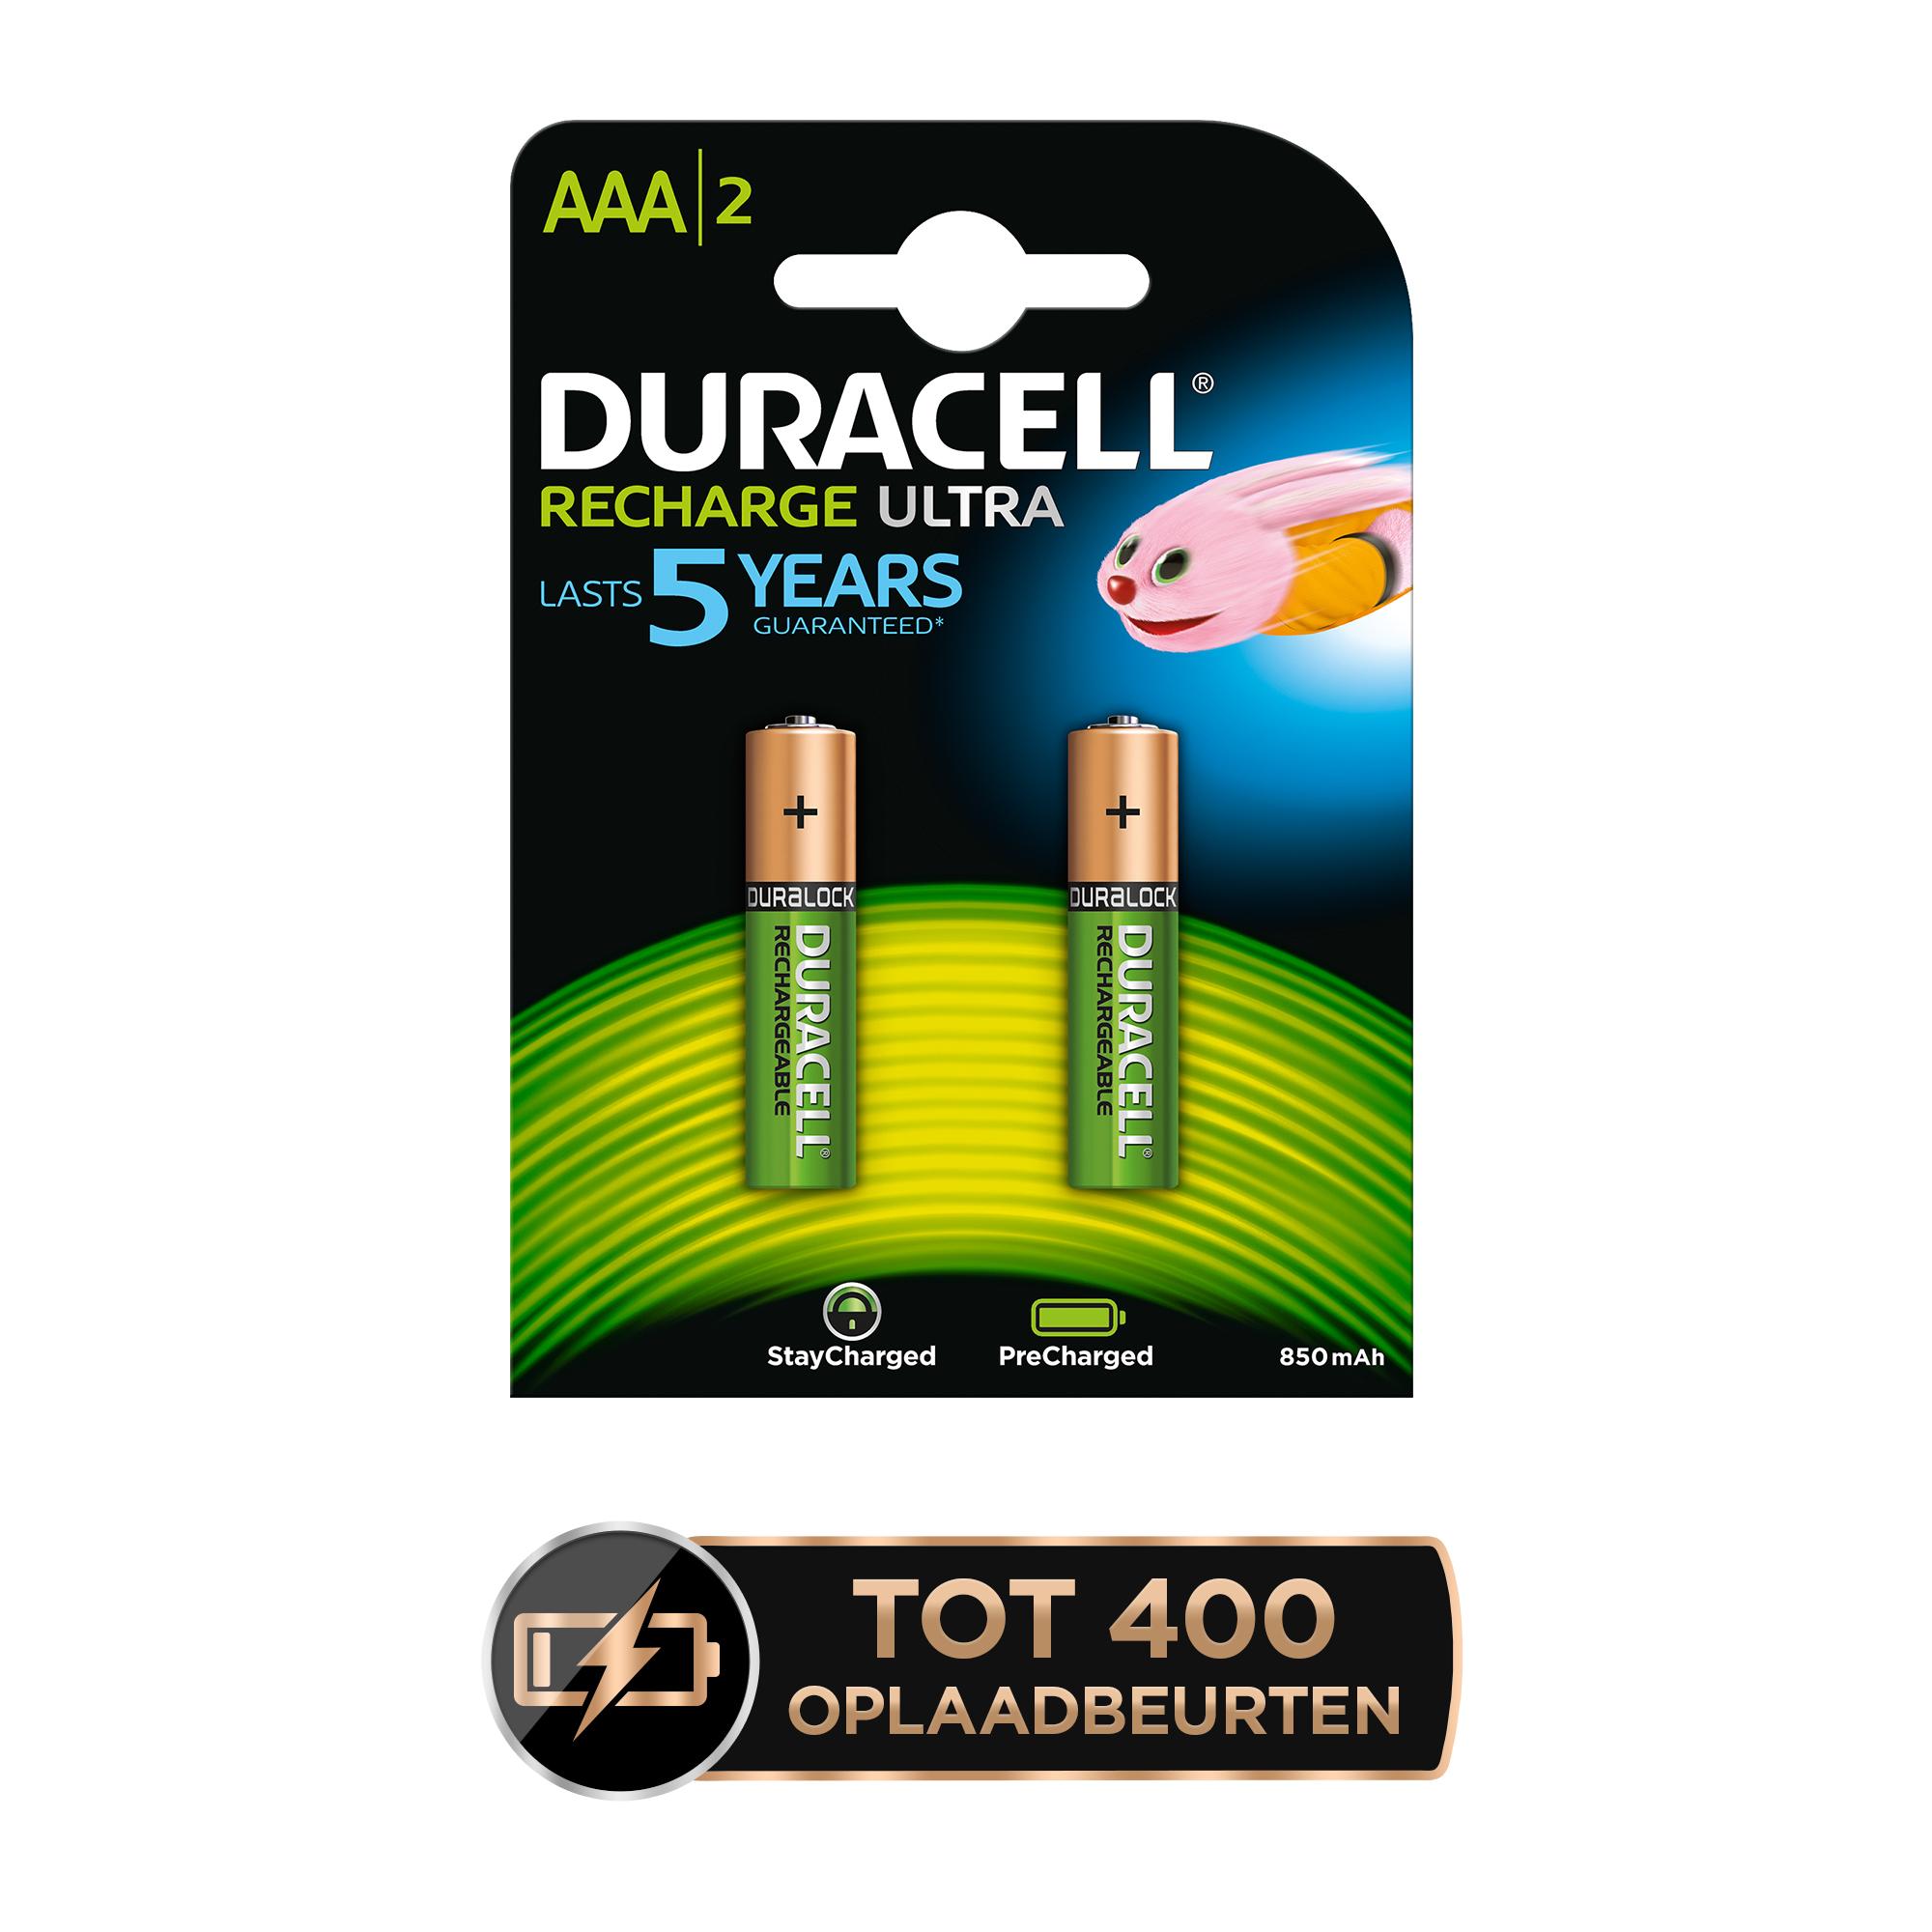 Duracell Recharge Ultra AAA